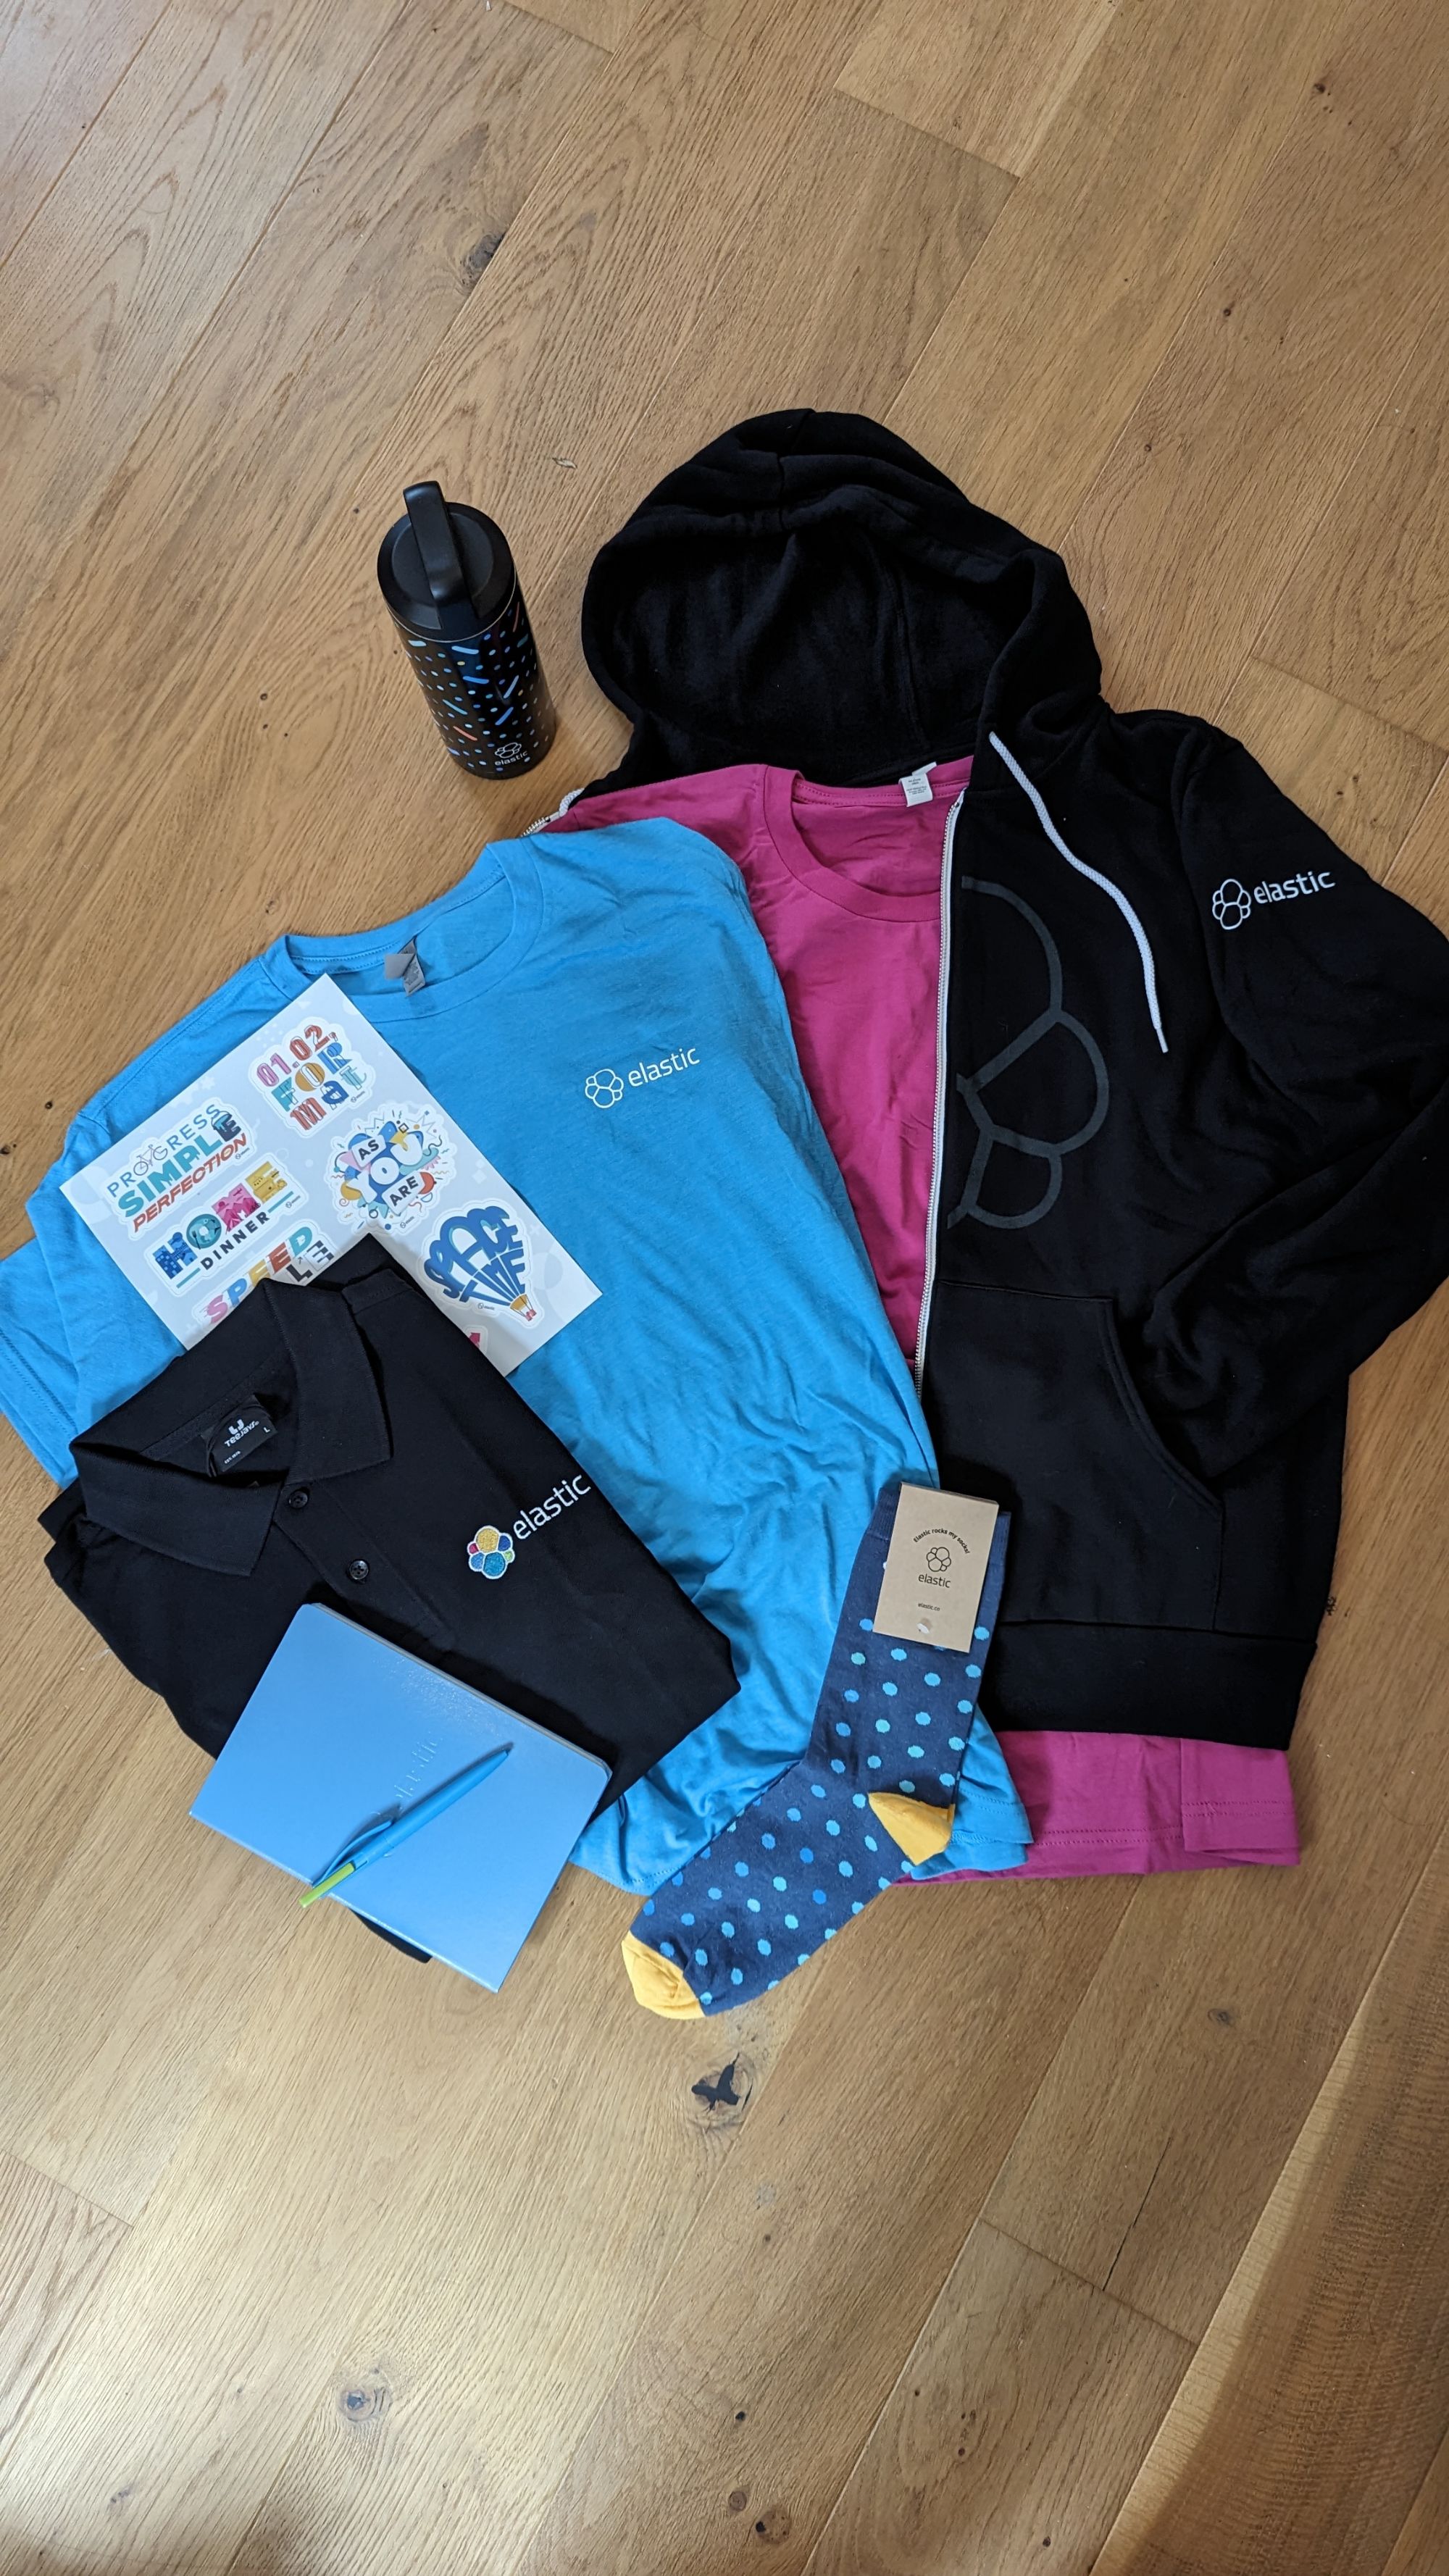 An arrangement of swag from Elastic, arranged neatly, and laid out on the wooden floor. There is a blue notebook, embossed with the Elastic logo, a black polo shirt, a set of stickers with the Elastic values that are super cute and really nicely stylised, a bright blue Elastic, a bright pink Elastic tshirt, a black hoodie, a pair of socks, and a slightly stripy water bottle. All the clothes are incredibly soft, and very high quality. There is also (not pictured) a darker blue "helper node" tshirt for volunteering in